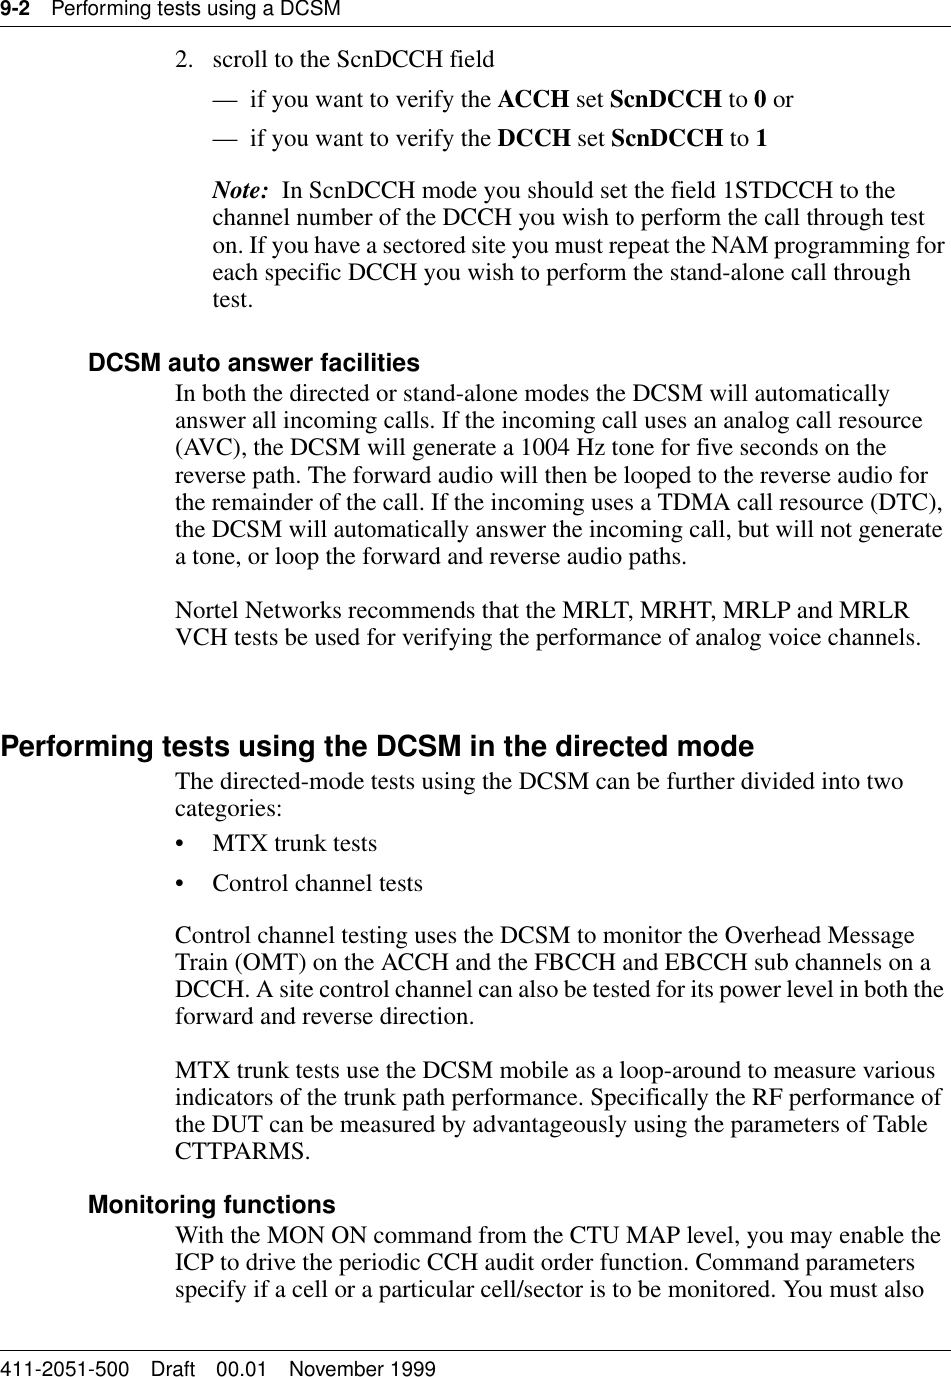 9-2 Performing tests using a DCSM411-2051-500 Draft 00.01 November 19992. scroll to the ScnDCCH field— if you want to verify the ACCH set ScnDCCH to 0 or— if you want to verify the DCCH set ScnDCCH to 1Note:  In ScnDCCH mode you should set the field 1STDCCH to the channel number of the DCCH you wish to perform the call through test on. If you have a sectored site you must repeat the NAM programming for each specific DCCH you wish to perform the stand-alone call through test.DCSM auto answer facilitiesIn both the directed or stand-alone modes the DCSM will automatically answer all incoming calls. If the incoming call uses an analog call resource (AVC), the DCSM will generate a 1004 Hz tone for five seconds on the reverse path. The forward audio will then be looped to the reverse audio for the remainder of the call. If the incoming uses a TDMA call resource (DTC), the DCSM will automatically answer the incoming call, but will not generate a tone, or loop the forward and reverse audio paths. Nortel Networks recommends that the MRLT, MRHT, MRLP and MRLR VCH tests be used for verifying the performance of analog voice channels.Performing tests using the DCSM in the directed modeThe directed-mode tests using the DCSM can be further divided into two categories:• MTX trunk tests • Control channel testsControl channel testing uses the DCSM to monitor the Overhead Message Train (OMT) on the ACCH and the FBCCH and EBCCH sub channels on a DCCH. A site control channel can also be tested for its power level in both the forward and reverse direction.MTX trunk tests use the DCSM mobile as a loop-around to measure various indicators of the trunk path performance. Specifically the RF performance of the DUT can be measured by advantageously using the parameters of Table CTTPARMS.Monitoring functionsWith the MON ON command from the CTU MAP level, you may enable the ICP to drive the periodic CCH audit order function. Command parameters specify if a cell or a particular cell/sector is to be monitored. You must also 